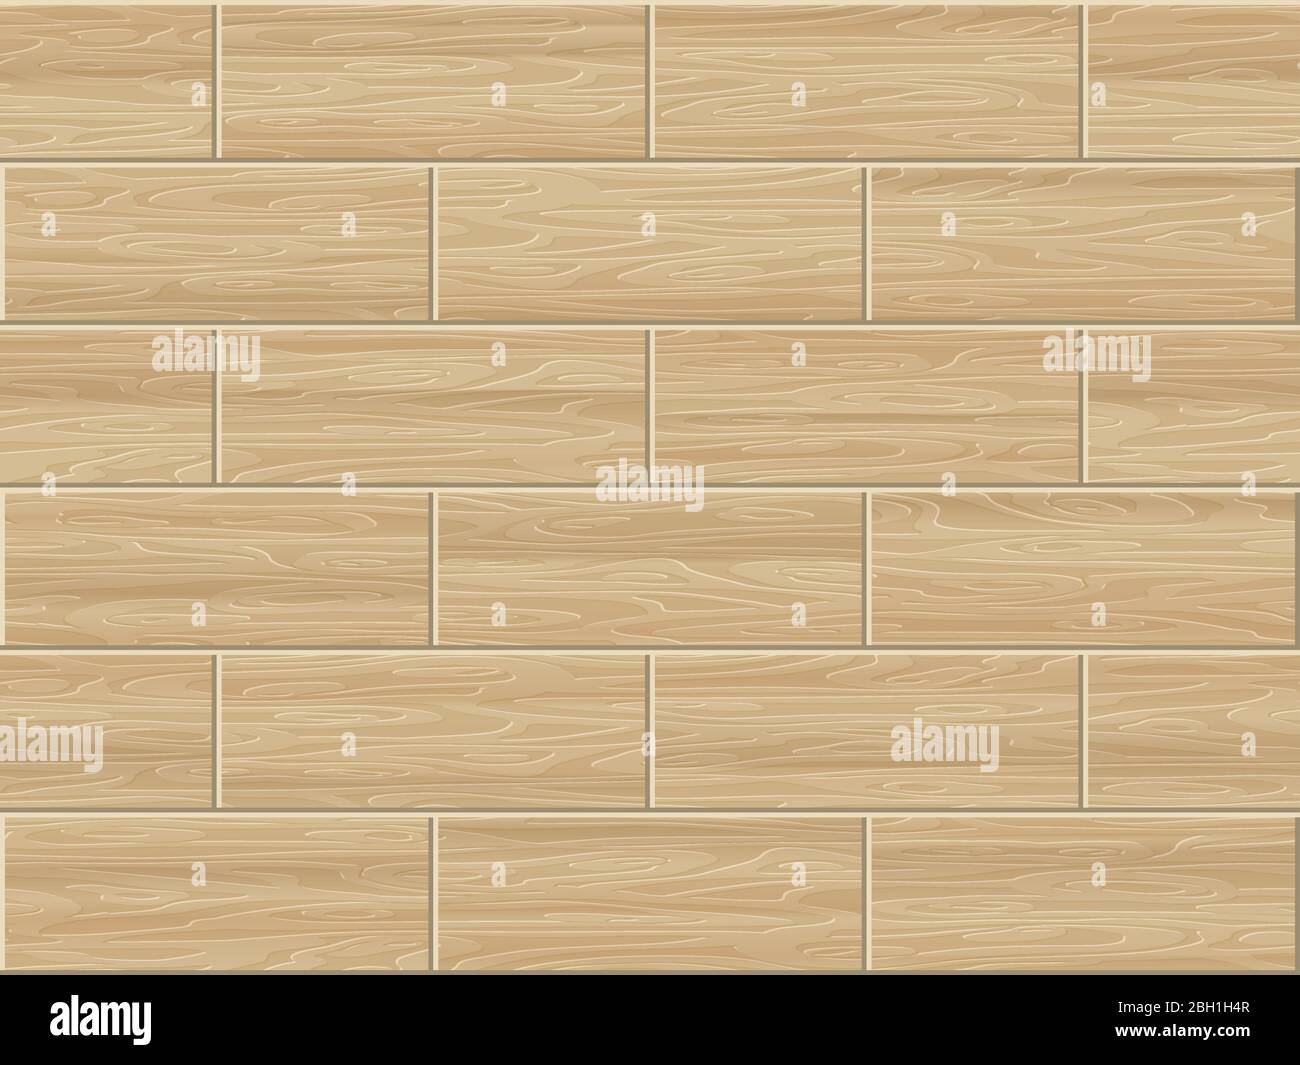 Seamless wooden board surface background. EPS 10 vector Stock Vector